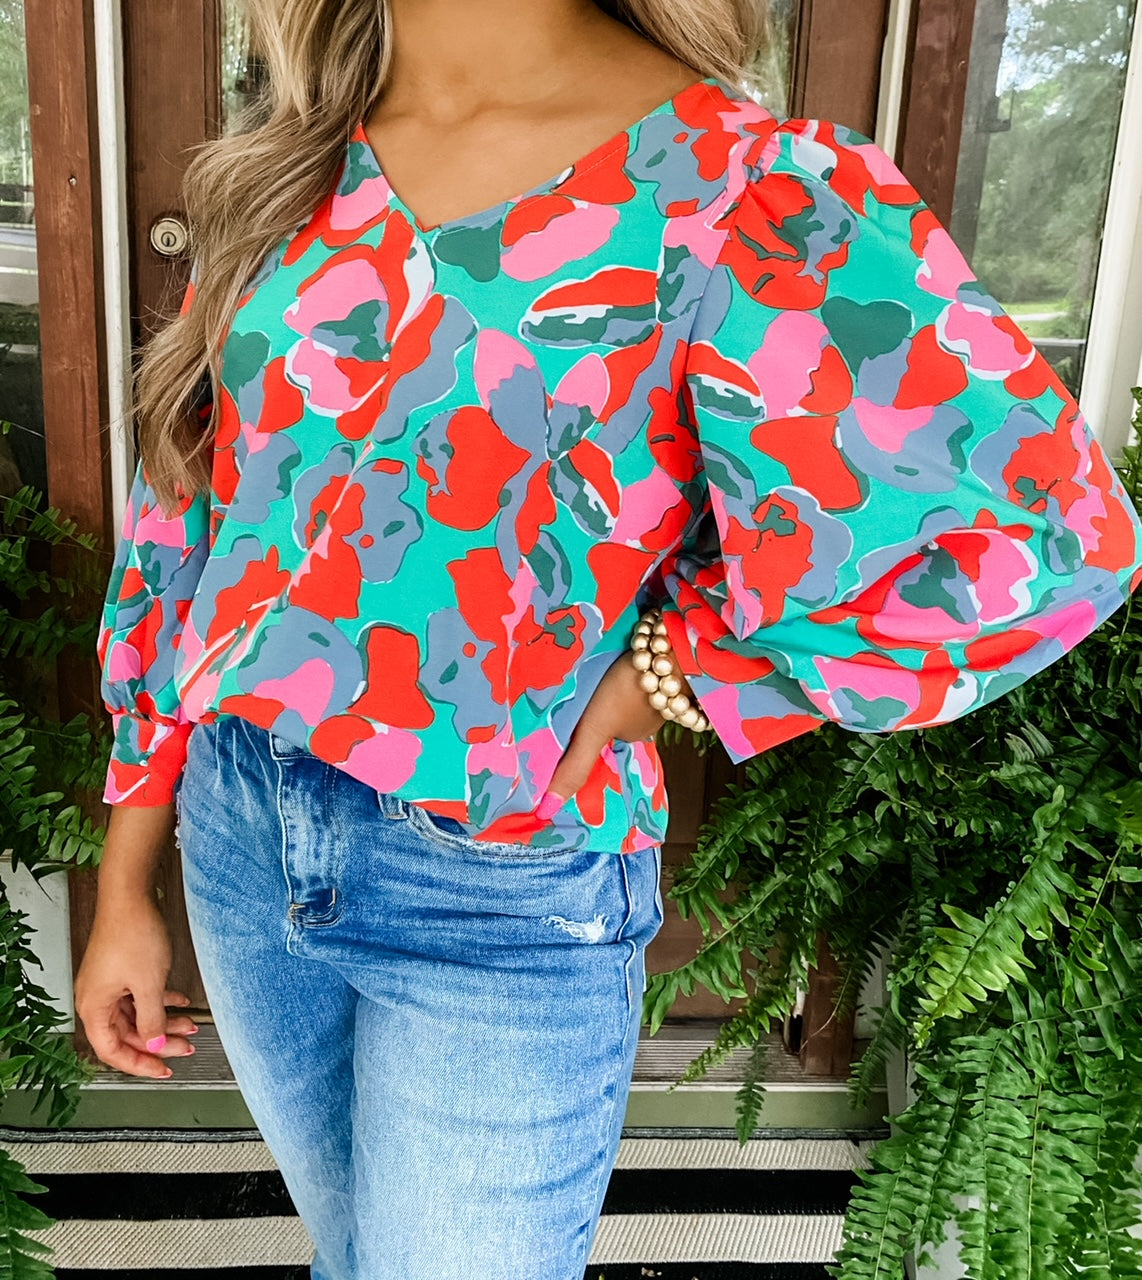 Michelle McDowell Aspen Top in Poppies Teal